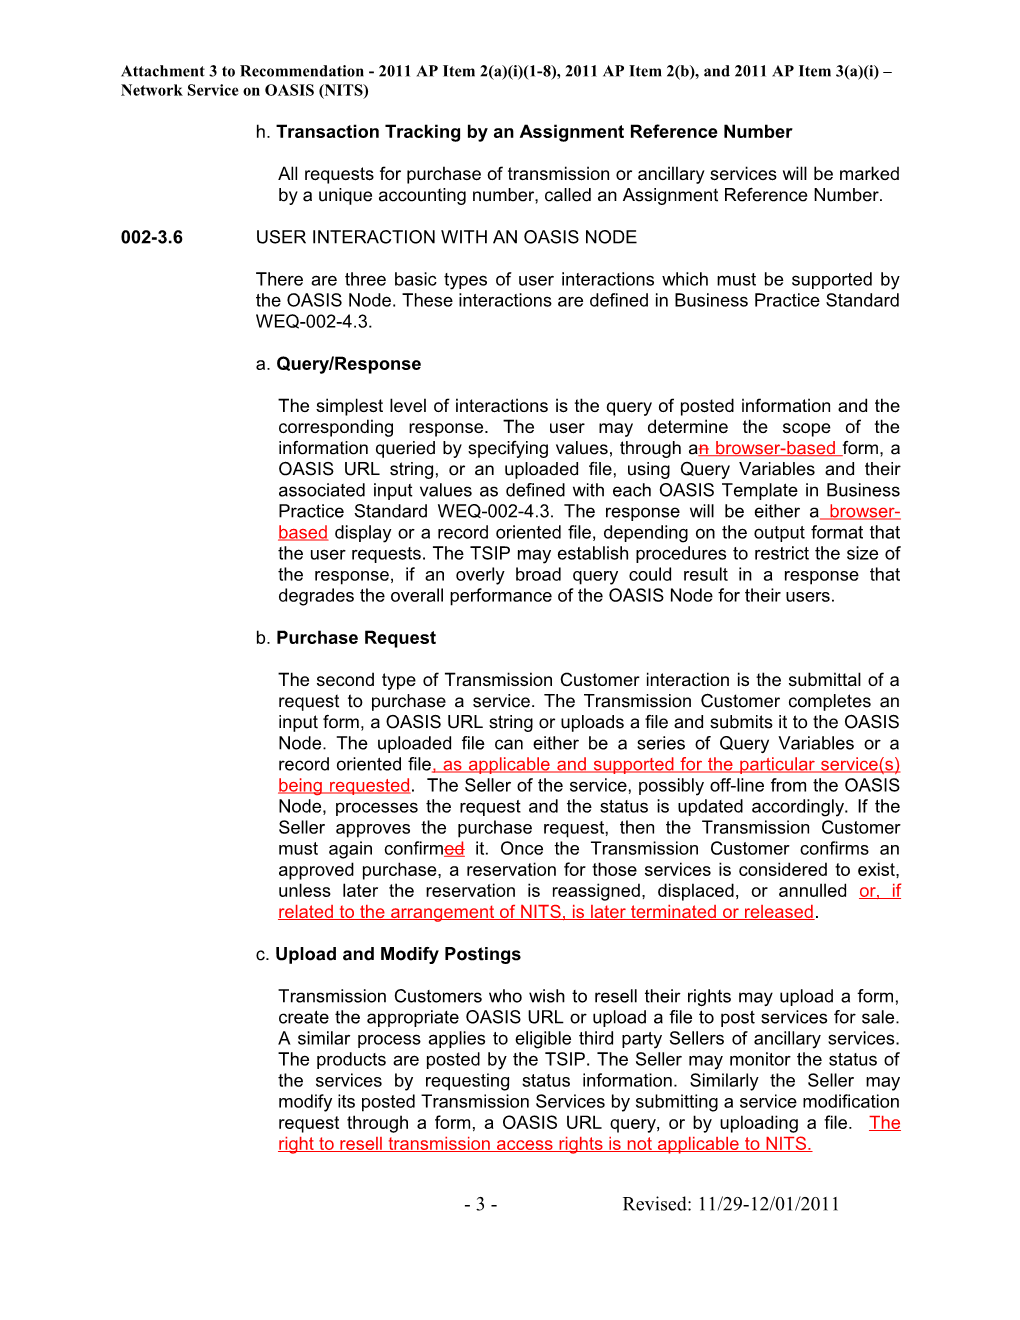 Attachment 3 to Recommendation - 2011 AP Item 2(A)(I)(1-8), 2011 AP Item 2(B), and 2011